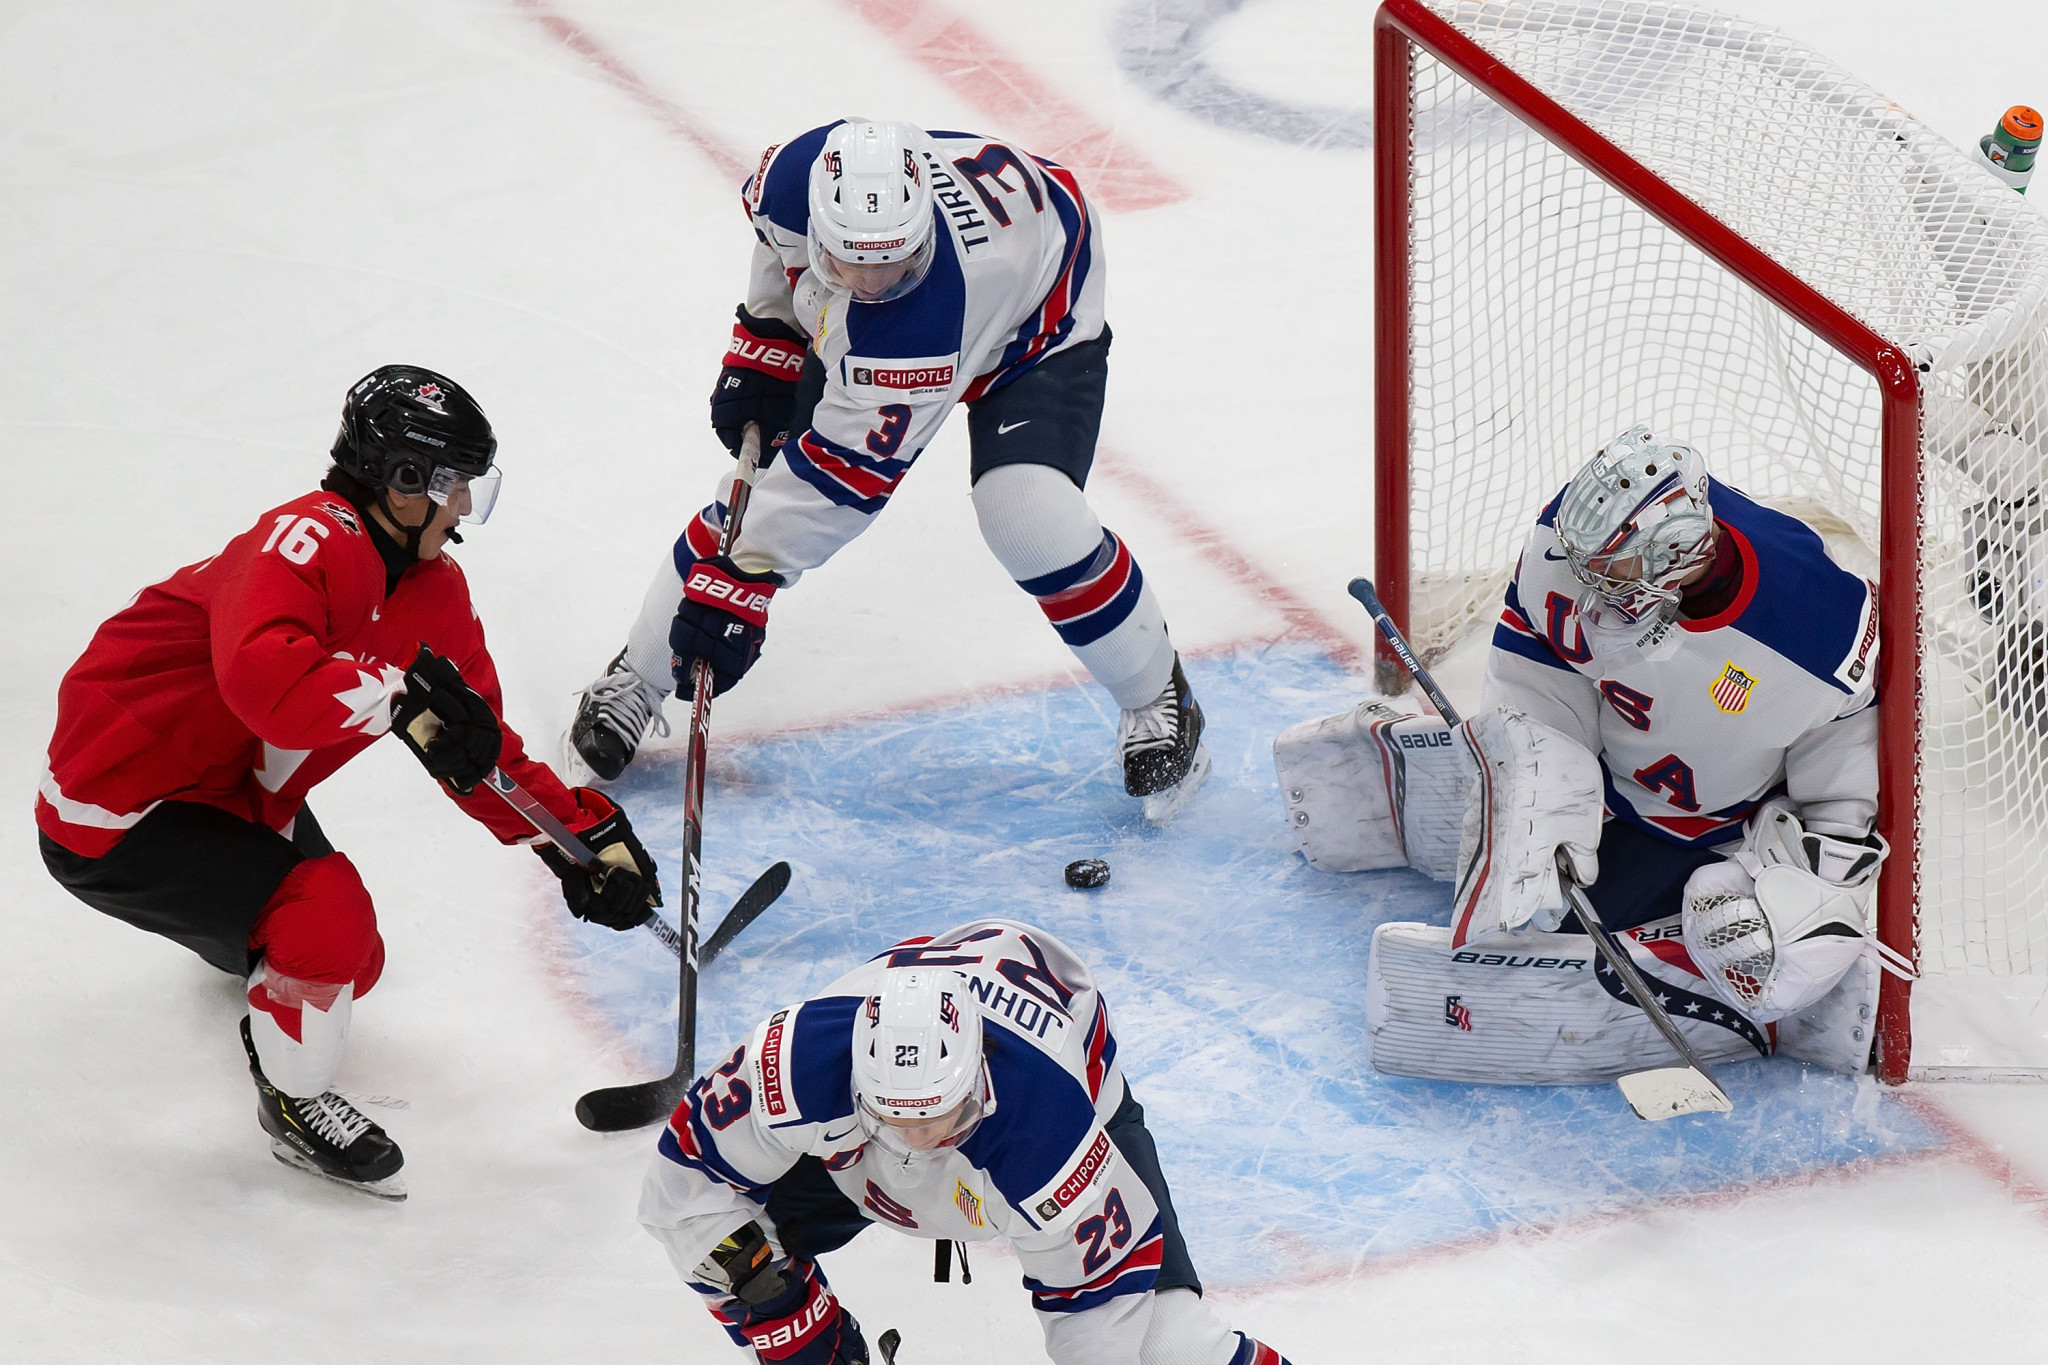 American goaltender Spencer Knight had an impressive performance to prevent Canada from scoring ©Getty Images